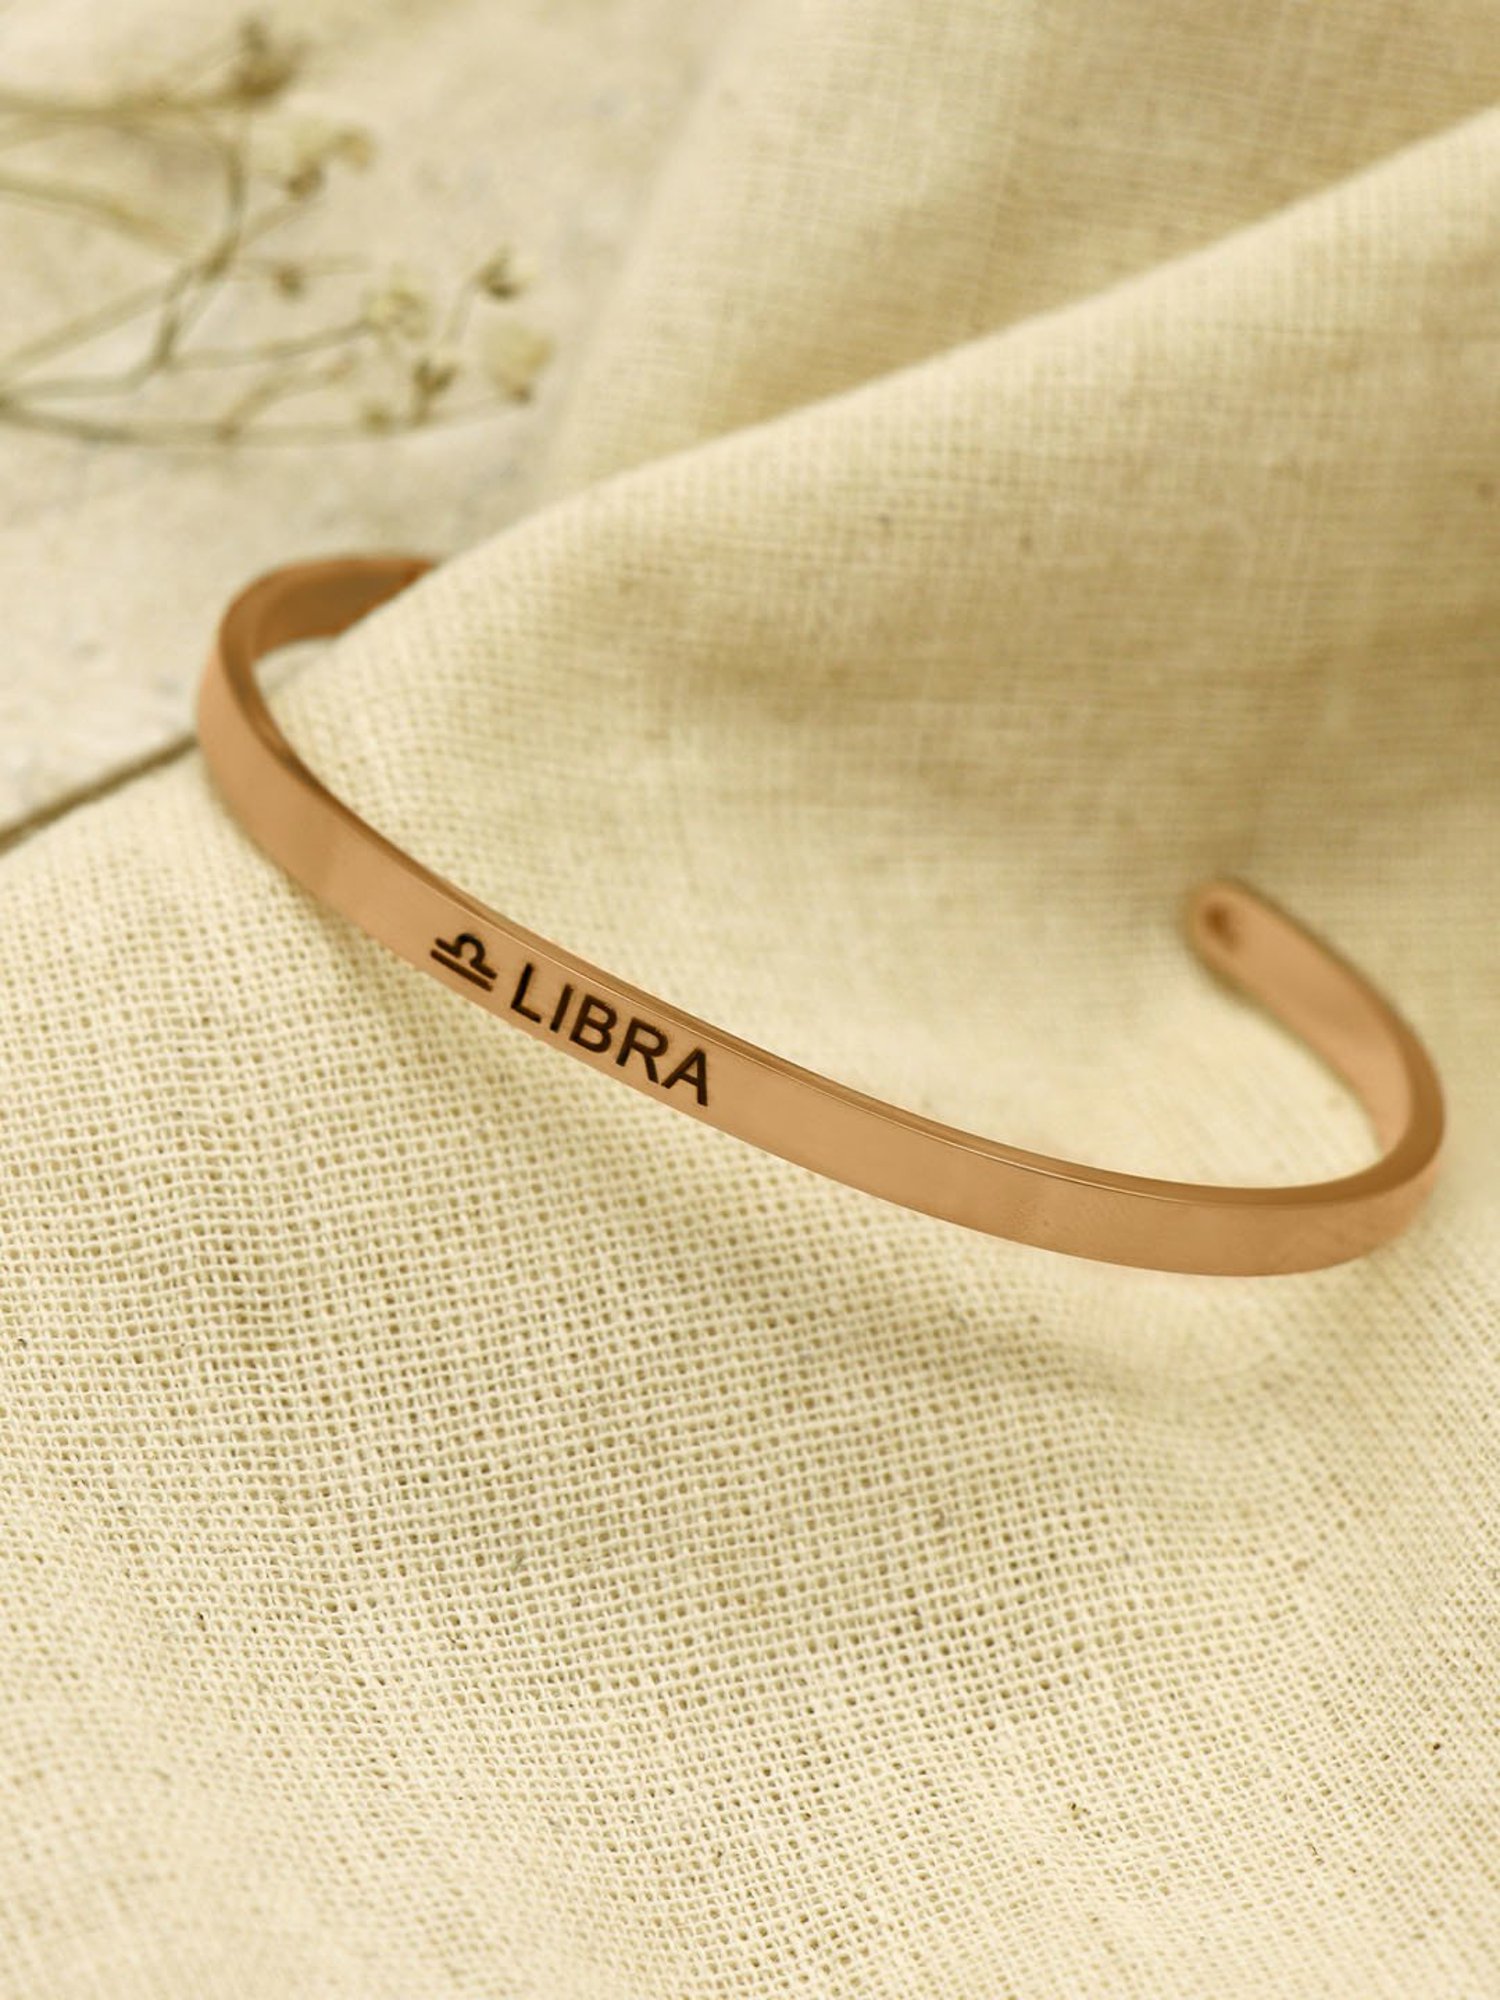 Libra Bracelet Sterling Silver, Raw Crystals Zodiac Sign Astrology Jewelry  - Etsy